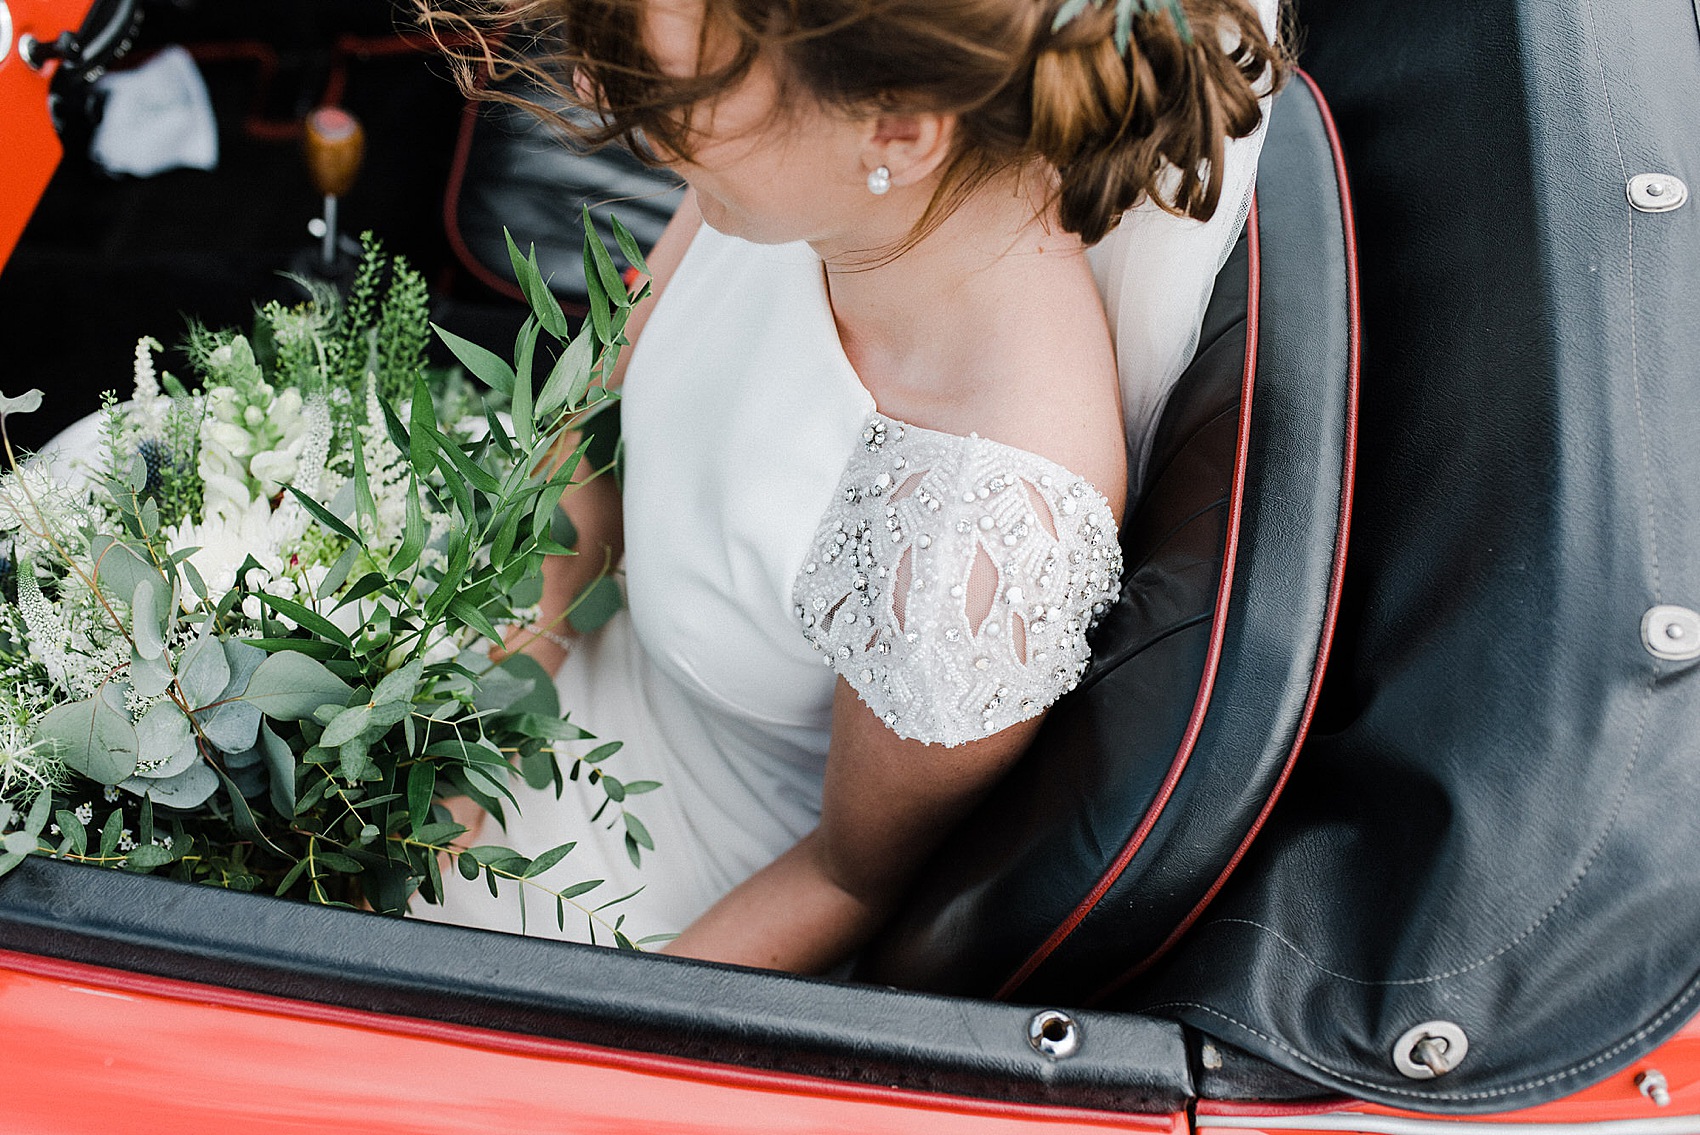 Pronovias cap sleeve dress Anglesey wedding  - Pronovias Elegance for a Modern, Coastal Country House Party Wedding on the Isle of Anglesey